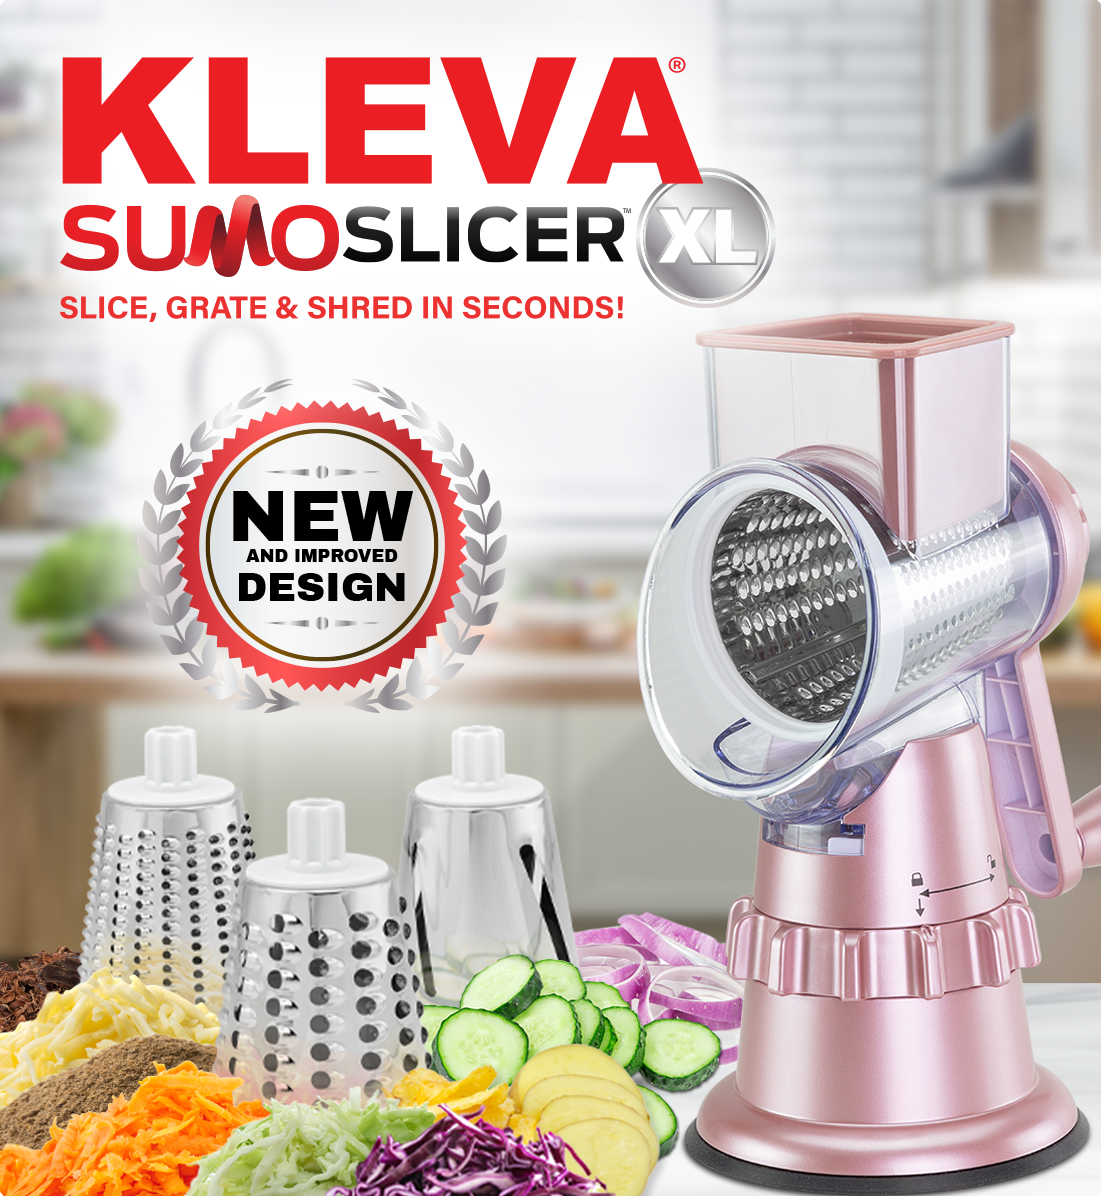 Kleva Range: Meal prep just got even easier with the NEW Sumo